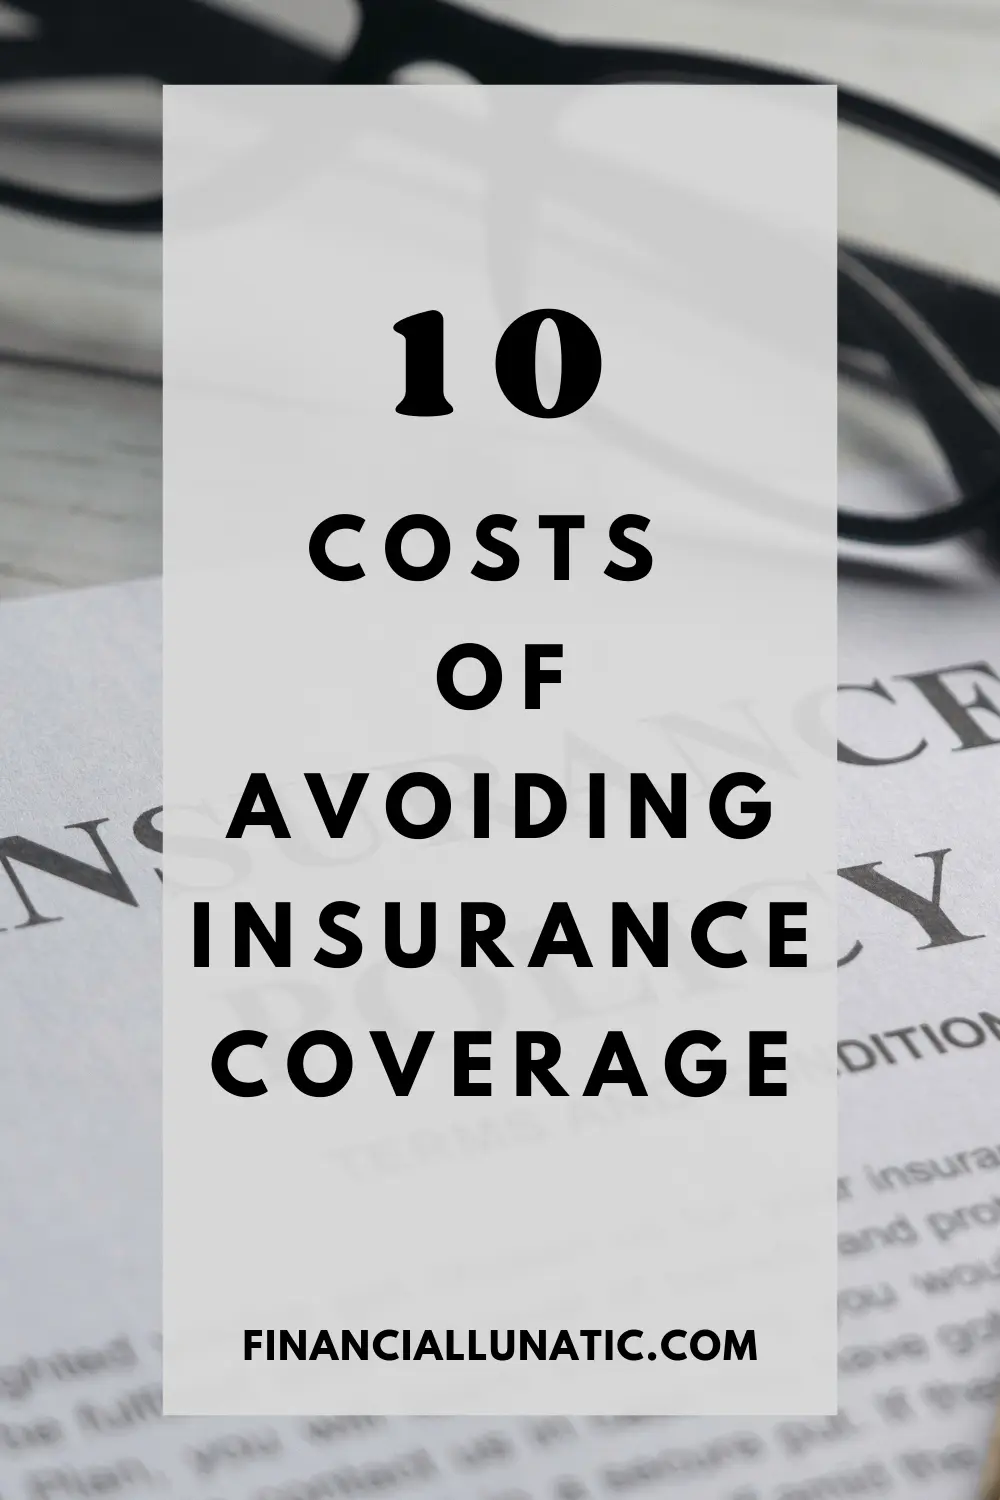 What is one cost of avoiding insurance